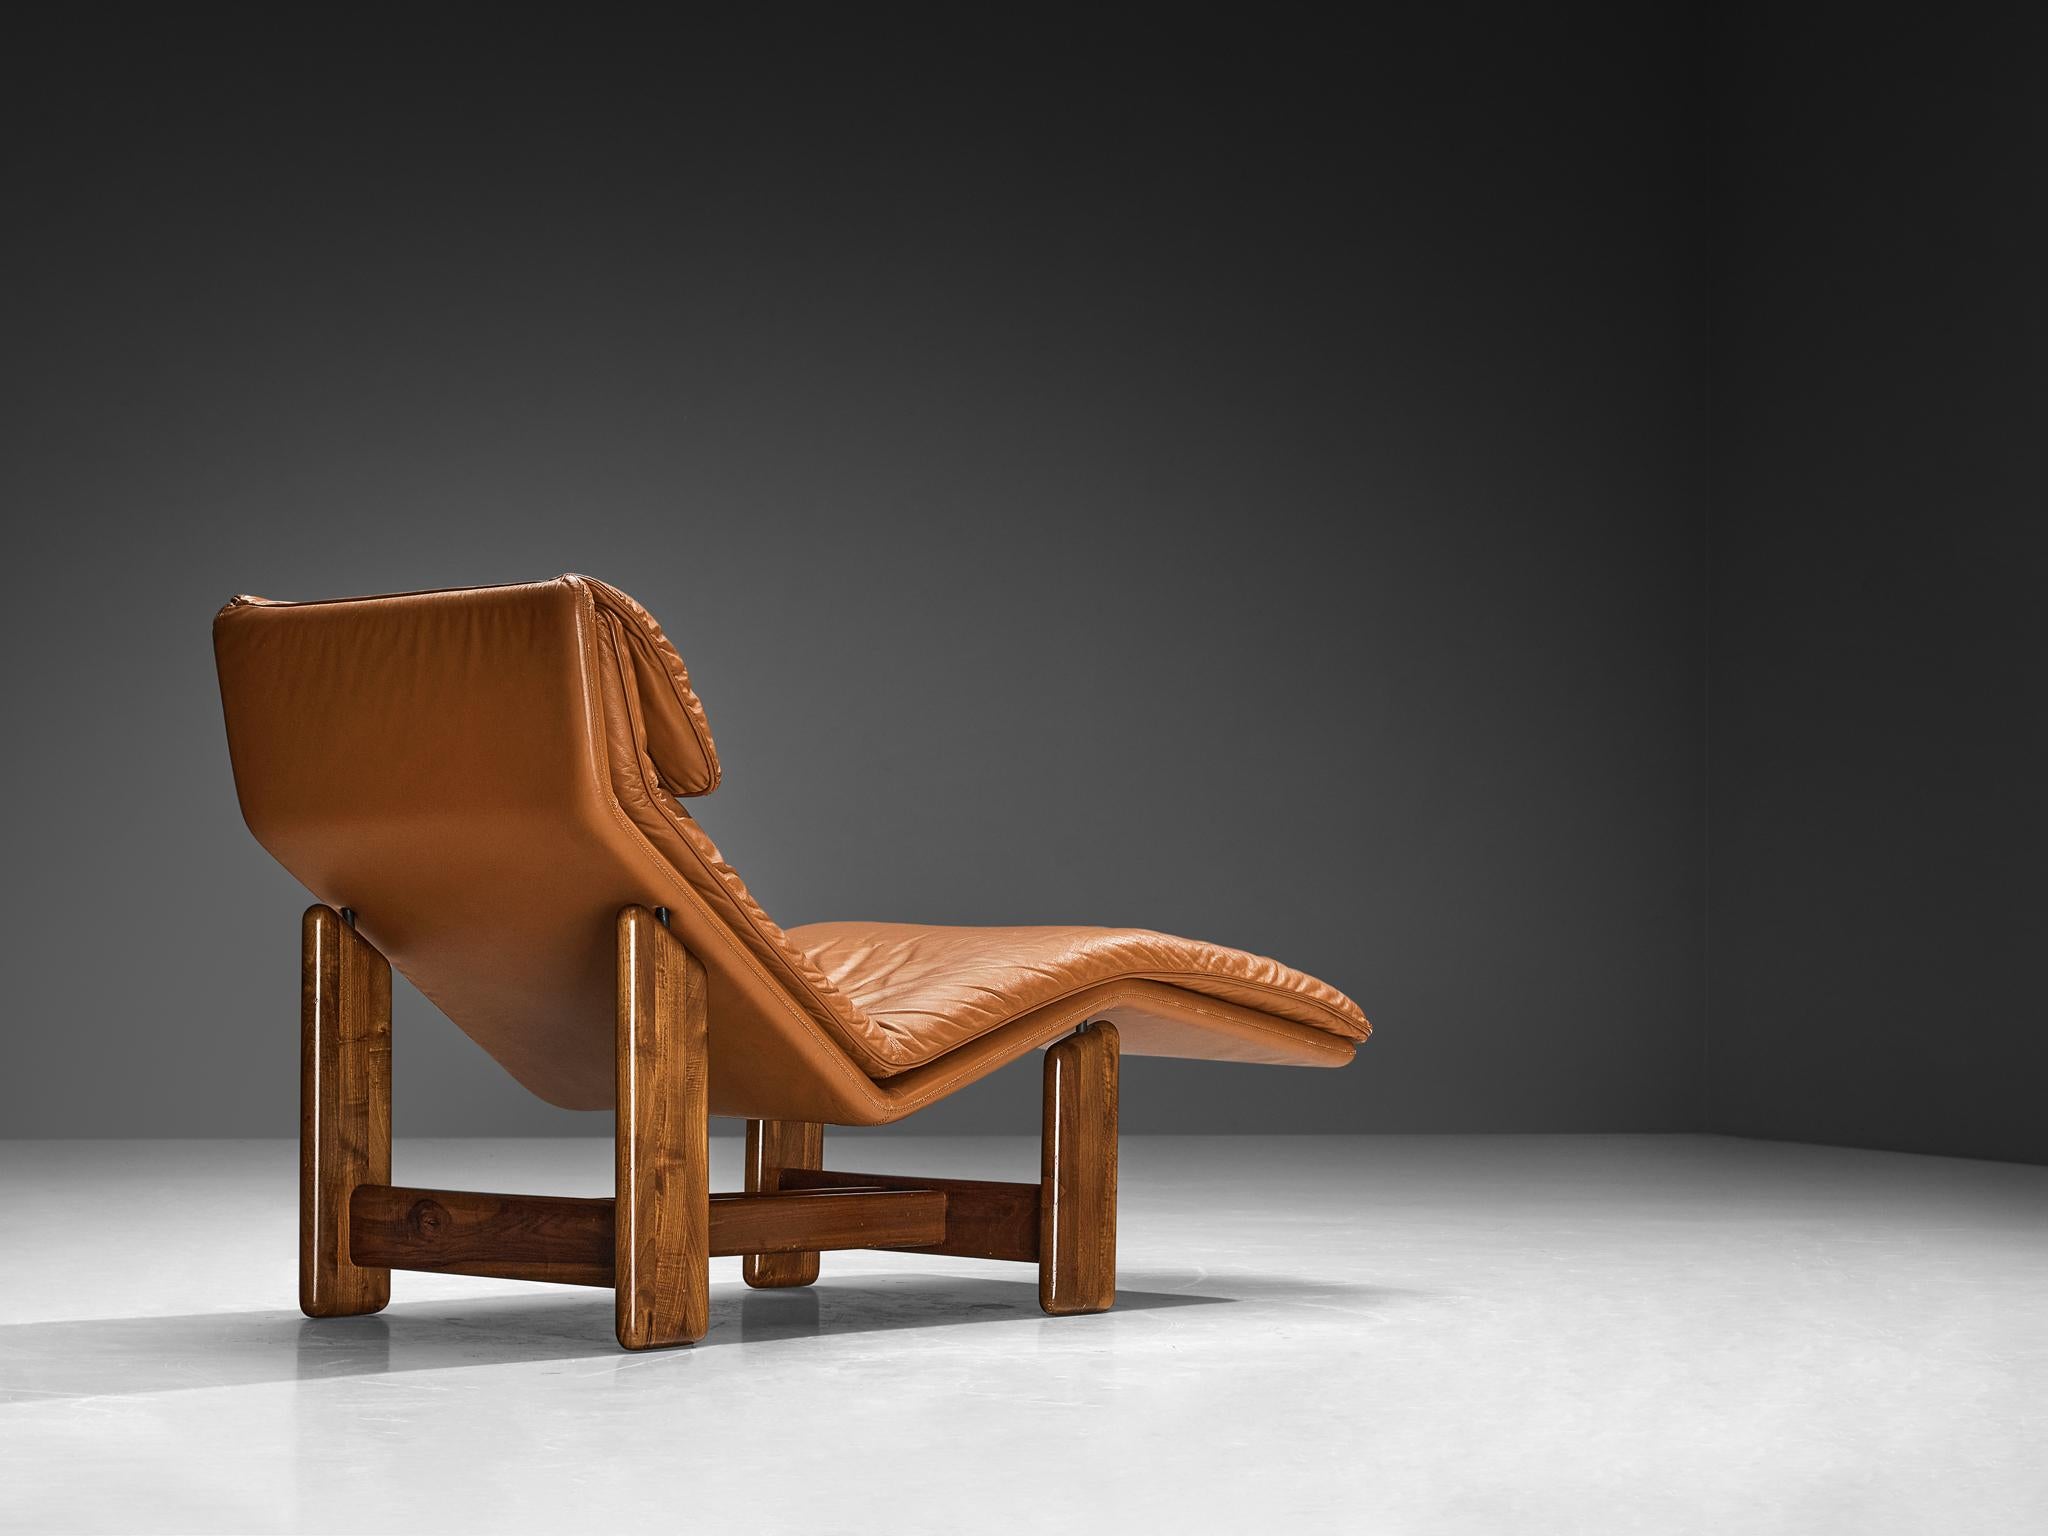 Tarcisio Colzani for Mobil Girgi, daybed or chaise longue, model 'Periplo', walnut, leather, Italy, 1970s

Sculptural chaise longue designed by Tarcisio Colzani for Mobil Girgi in the 1970s. This piece is made in cognac brown leather. The top has a